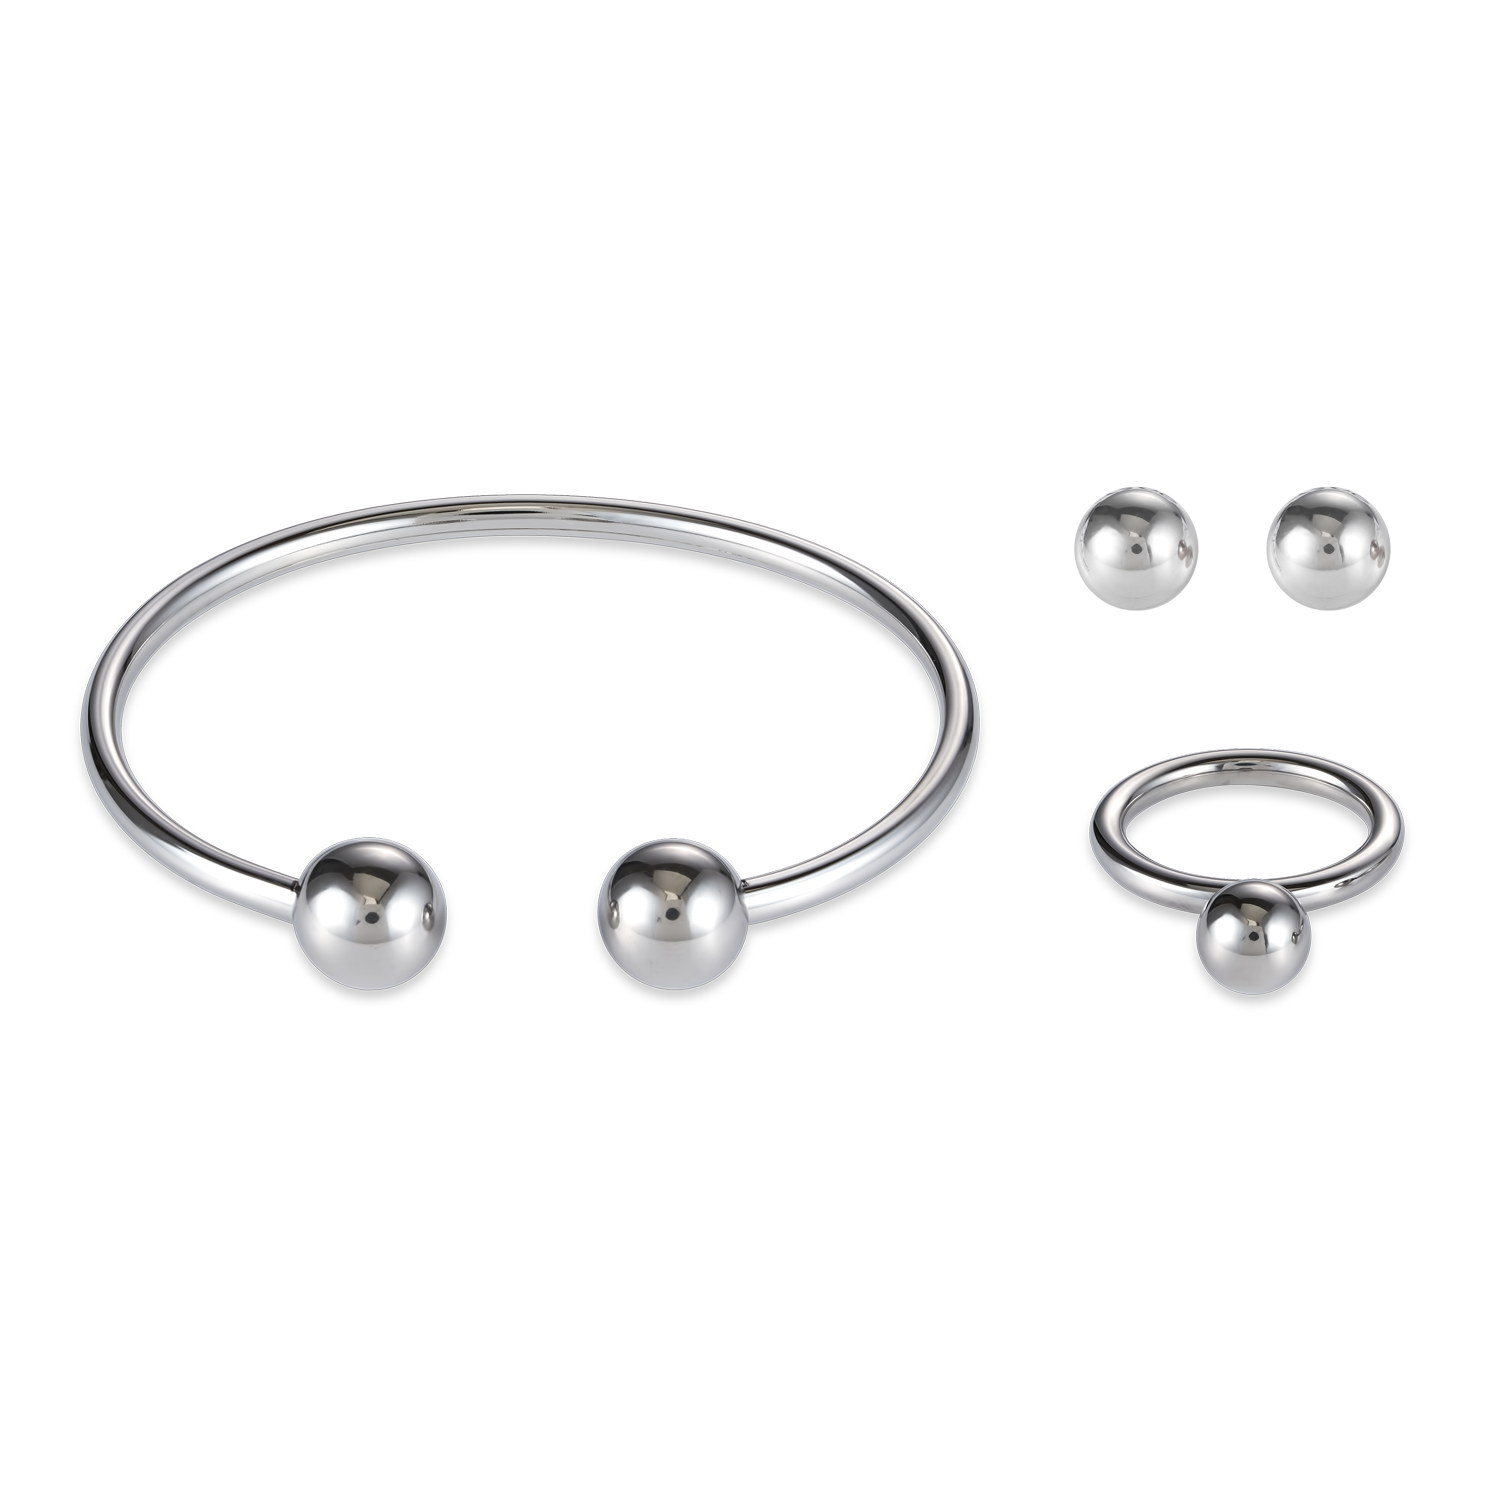 Earrings stainless steel ball small silver